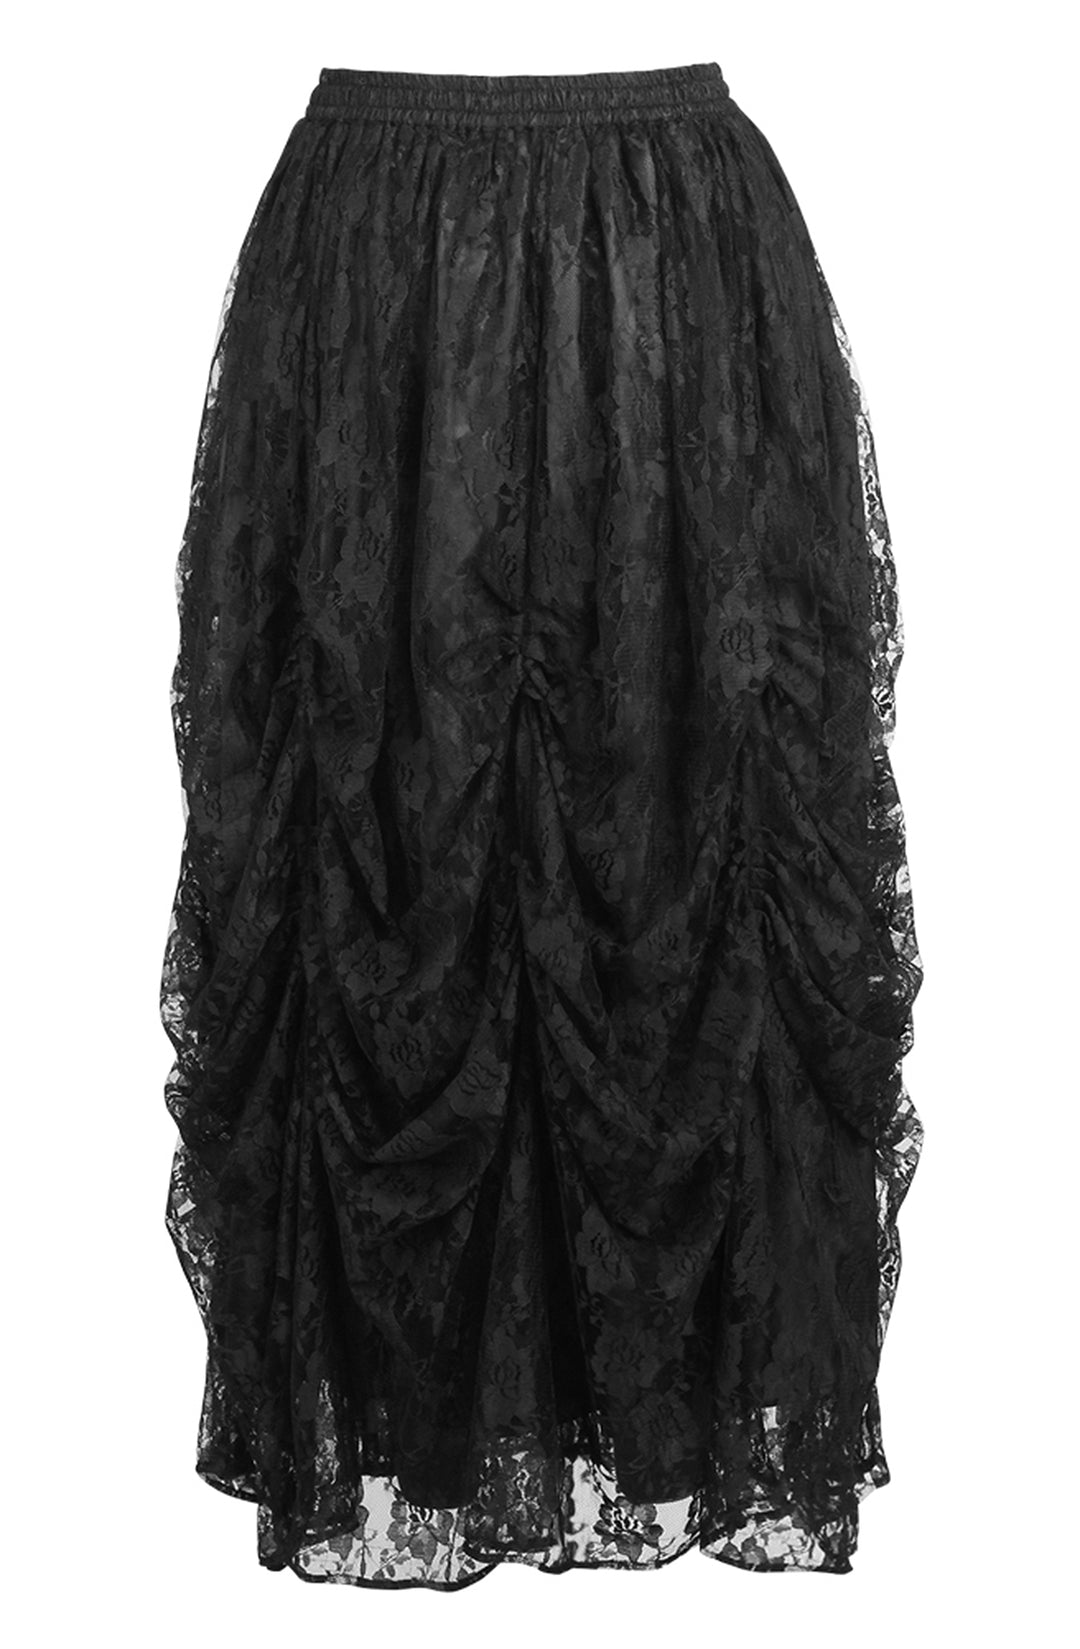 Black Lace Ball Gown Skirt 2